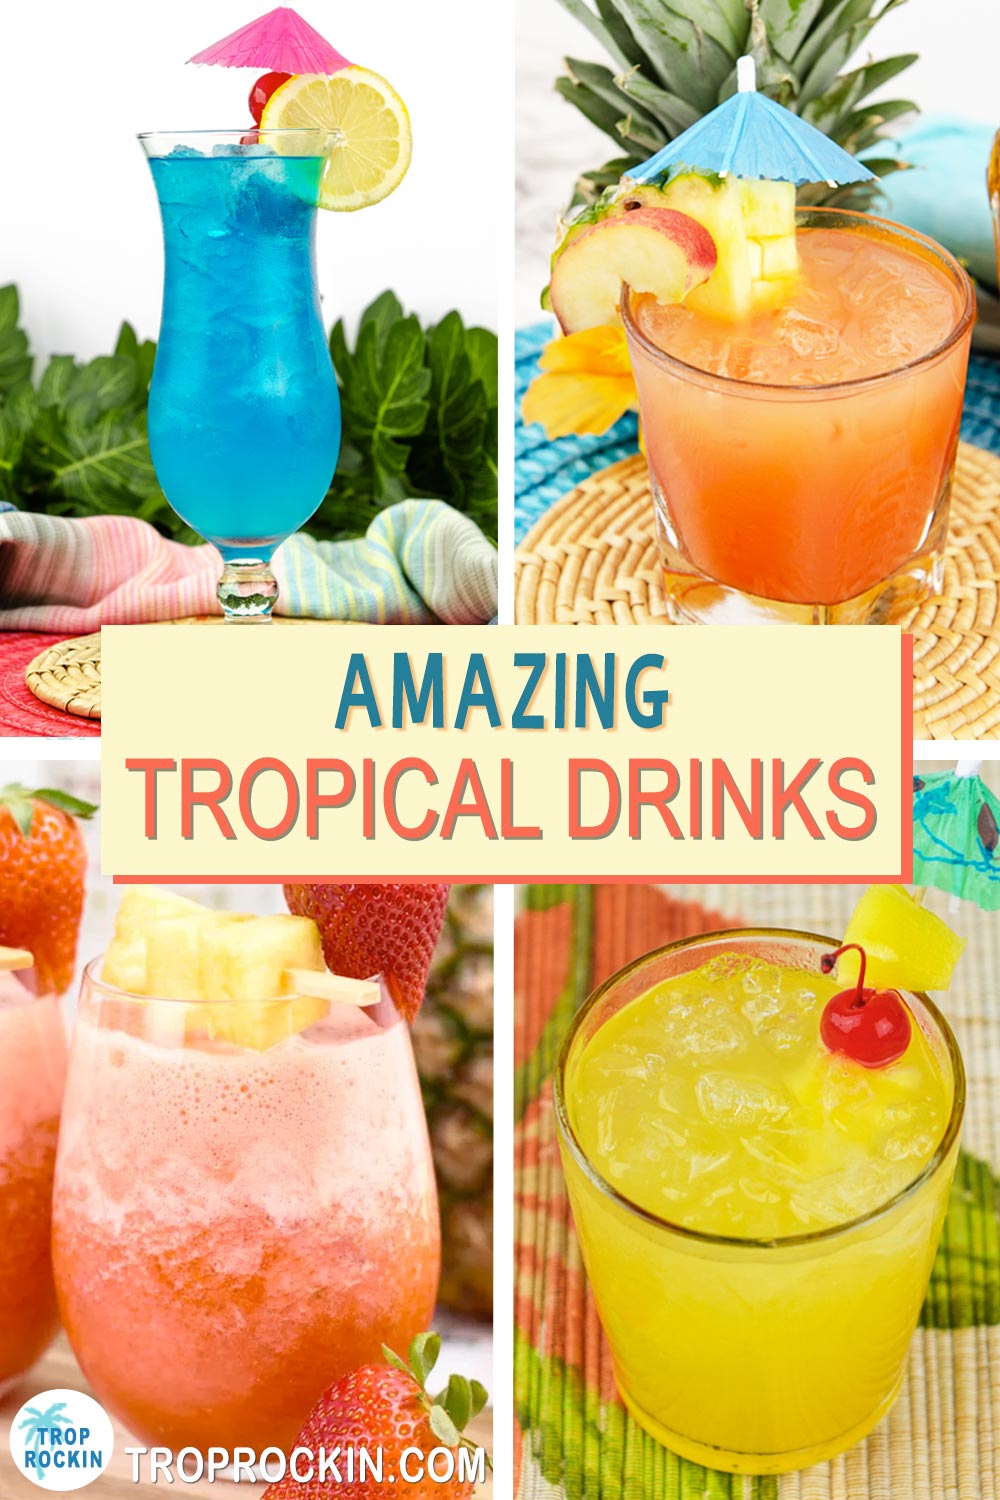 Tropical Drinks collage for tropical drink recipes.